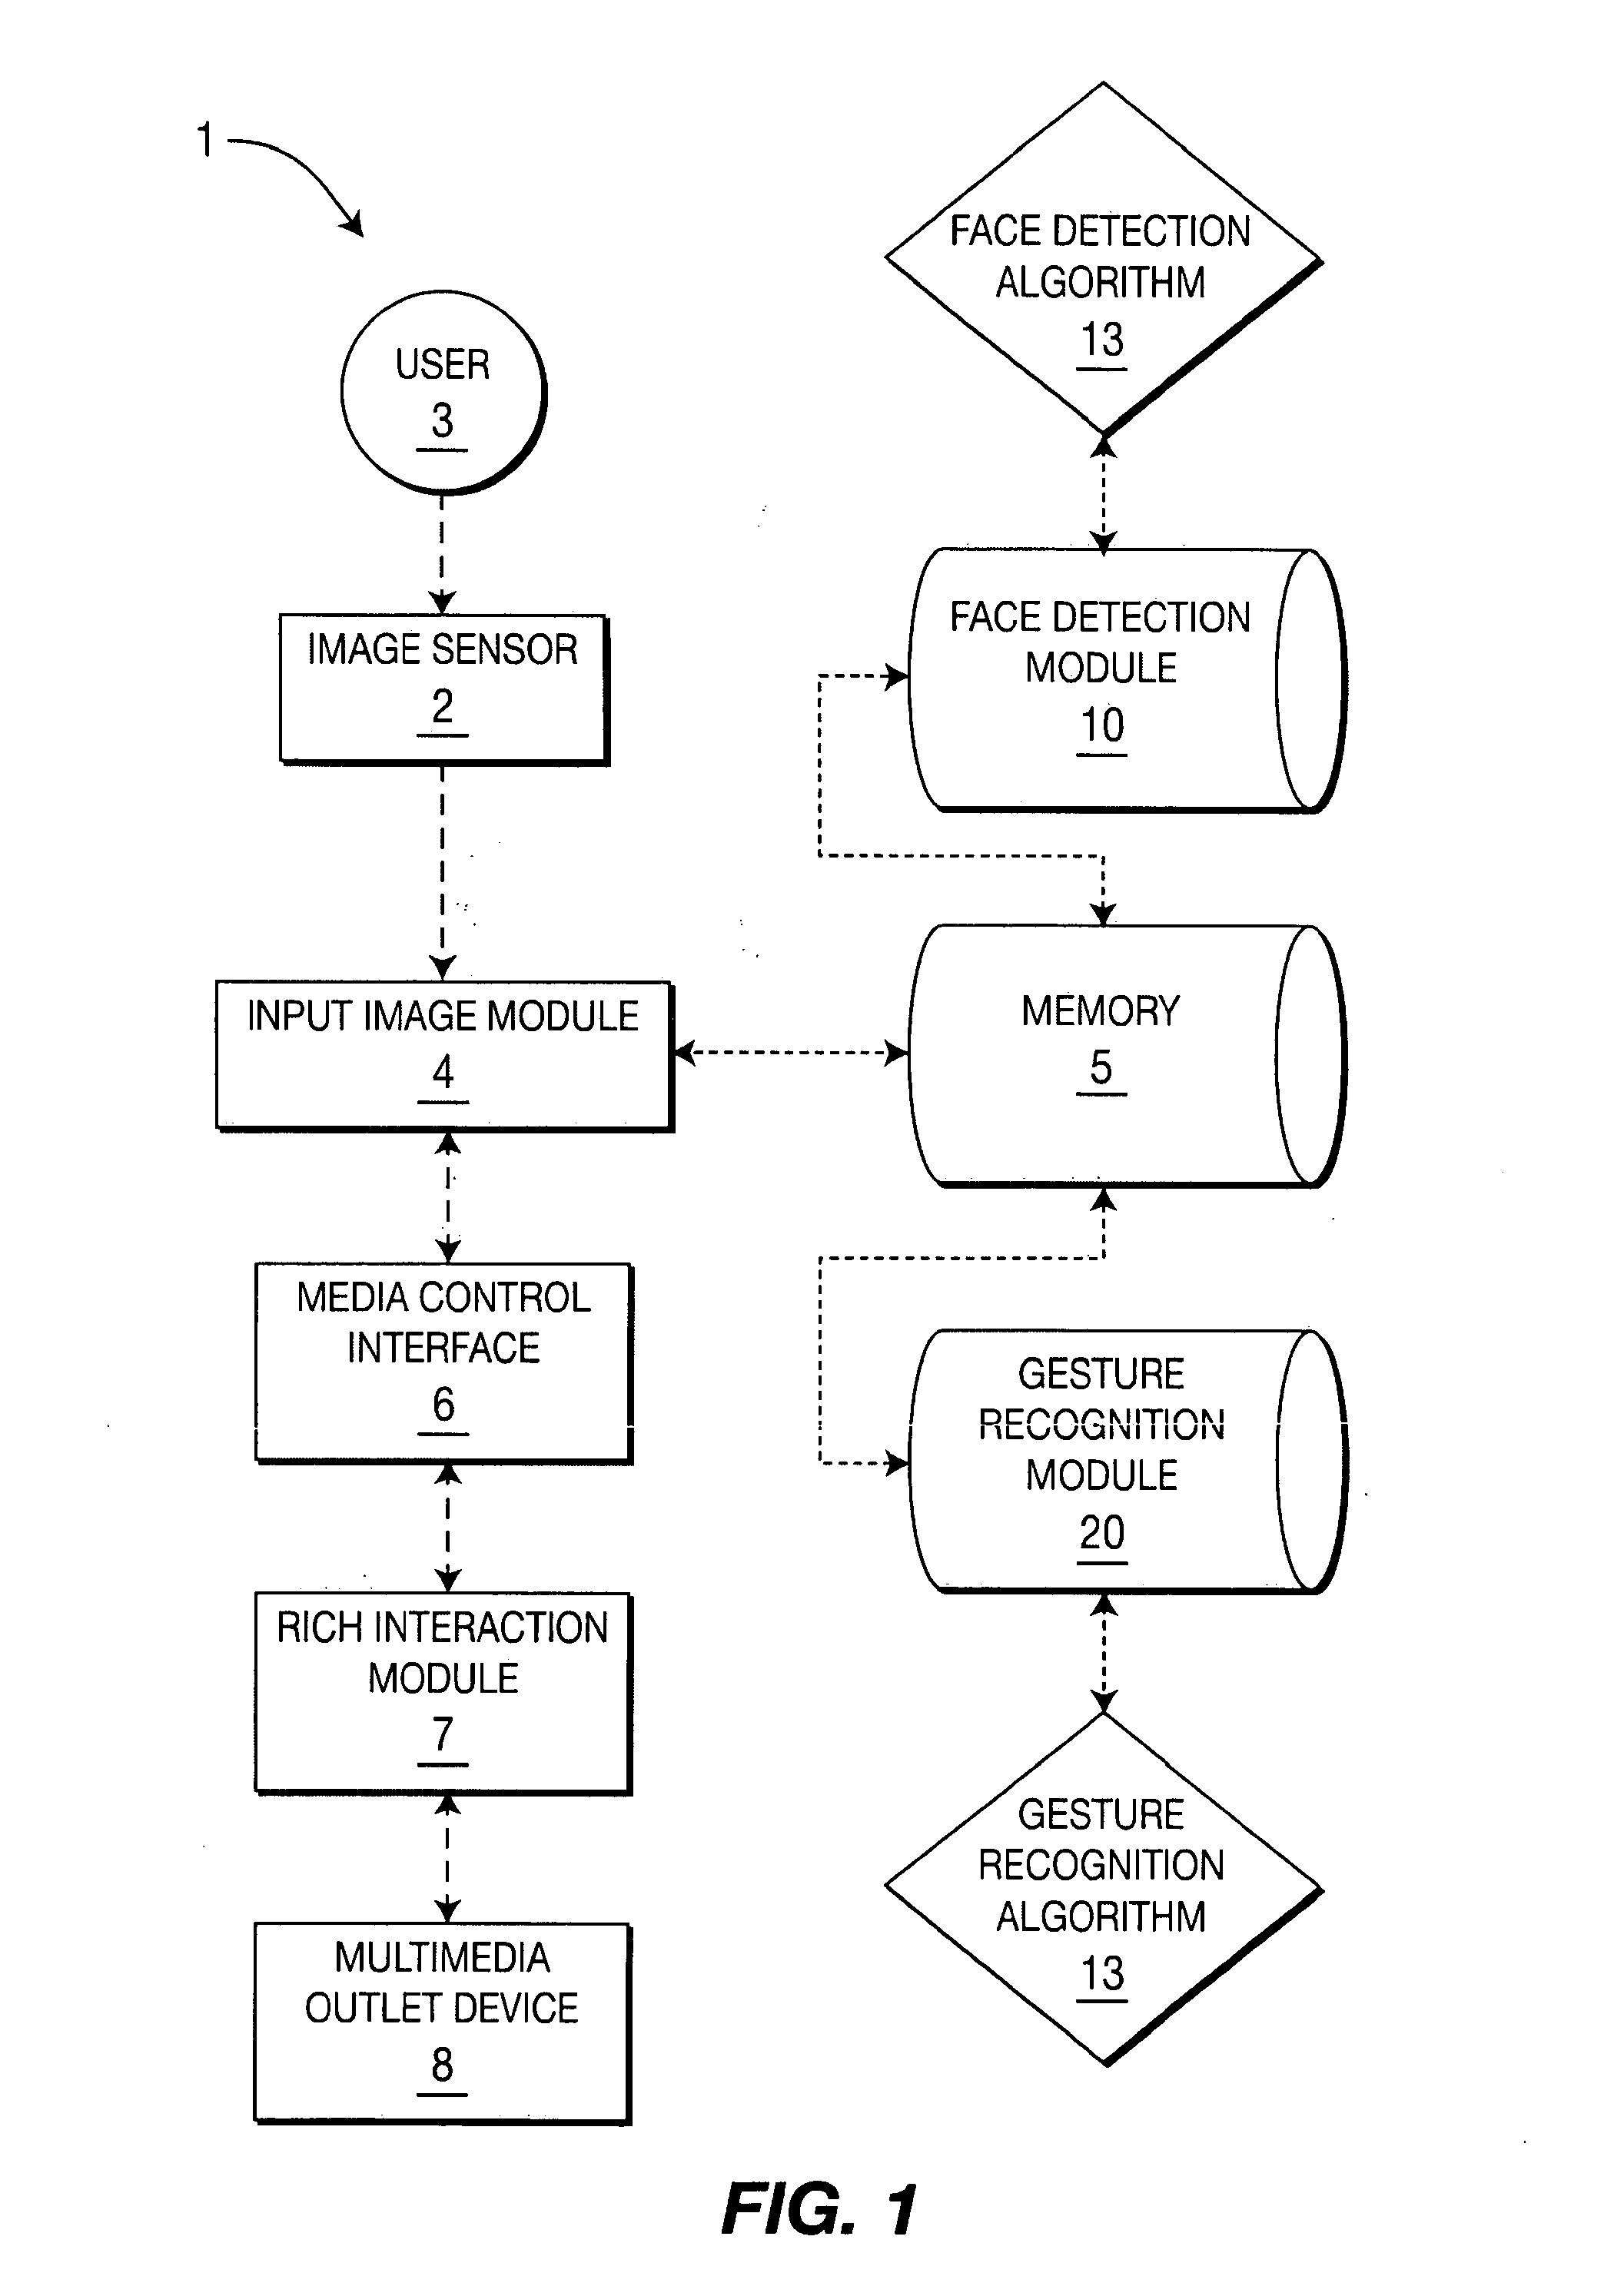 Method for controlling and requesting information from displaying multimedia